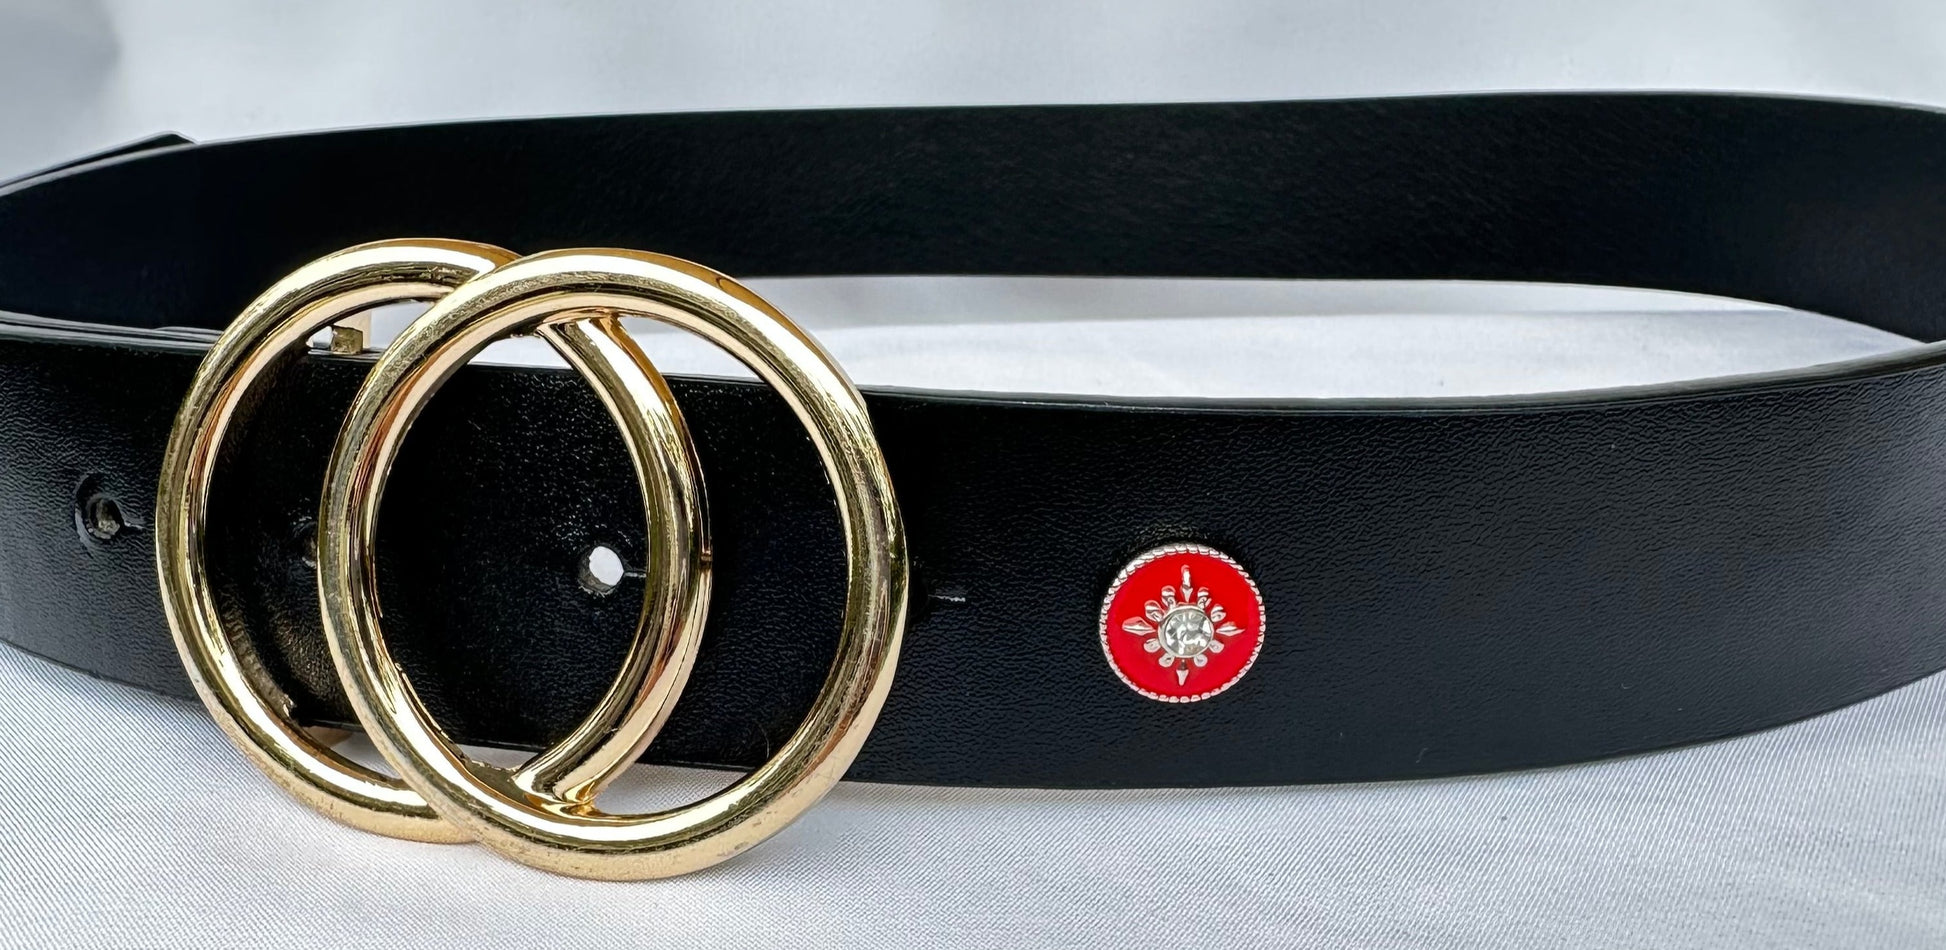 Red Star Charm for Belts, Bags and Watch Bands